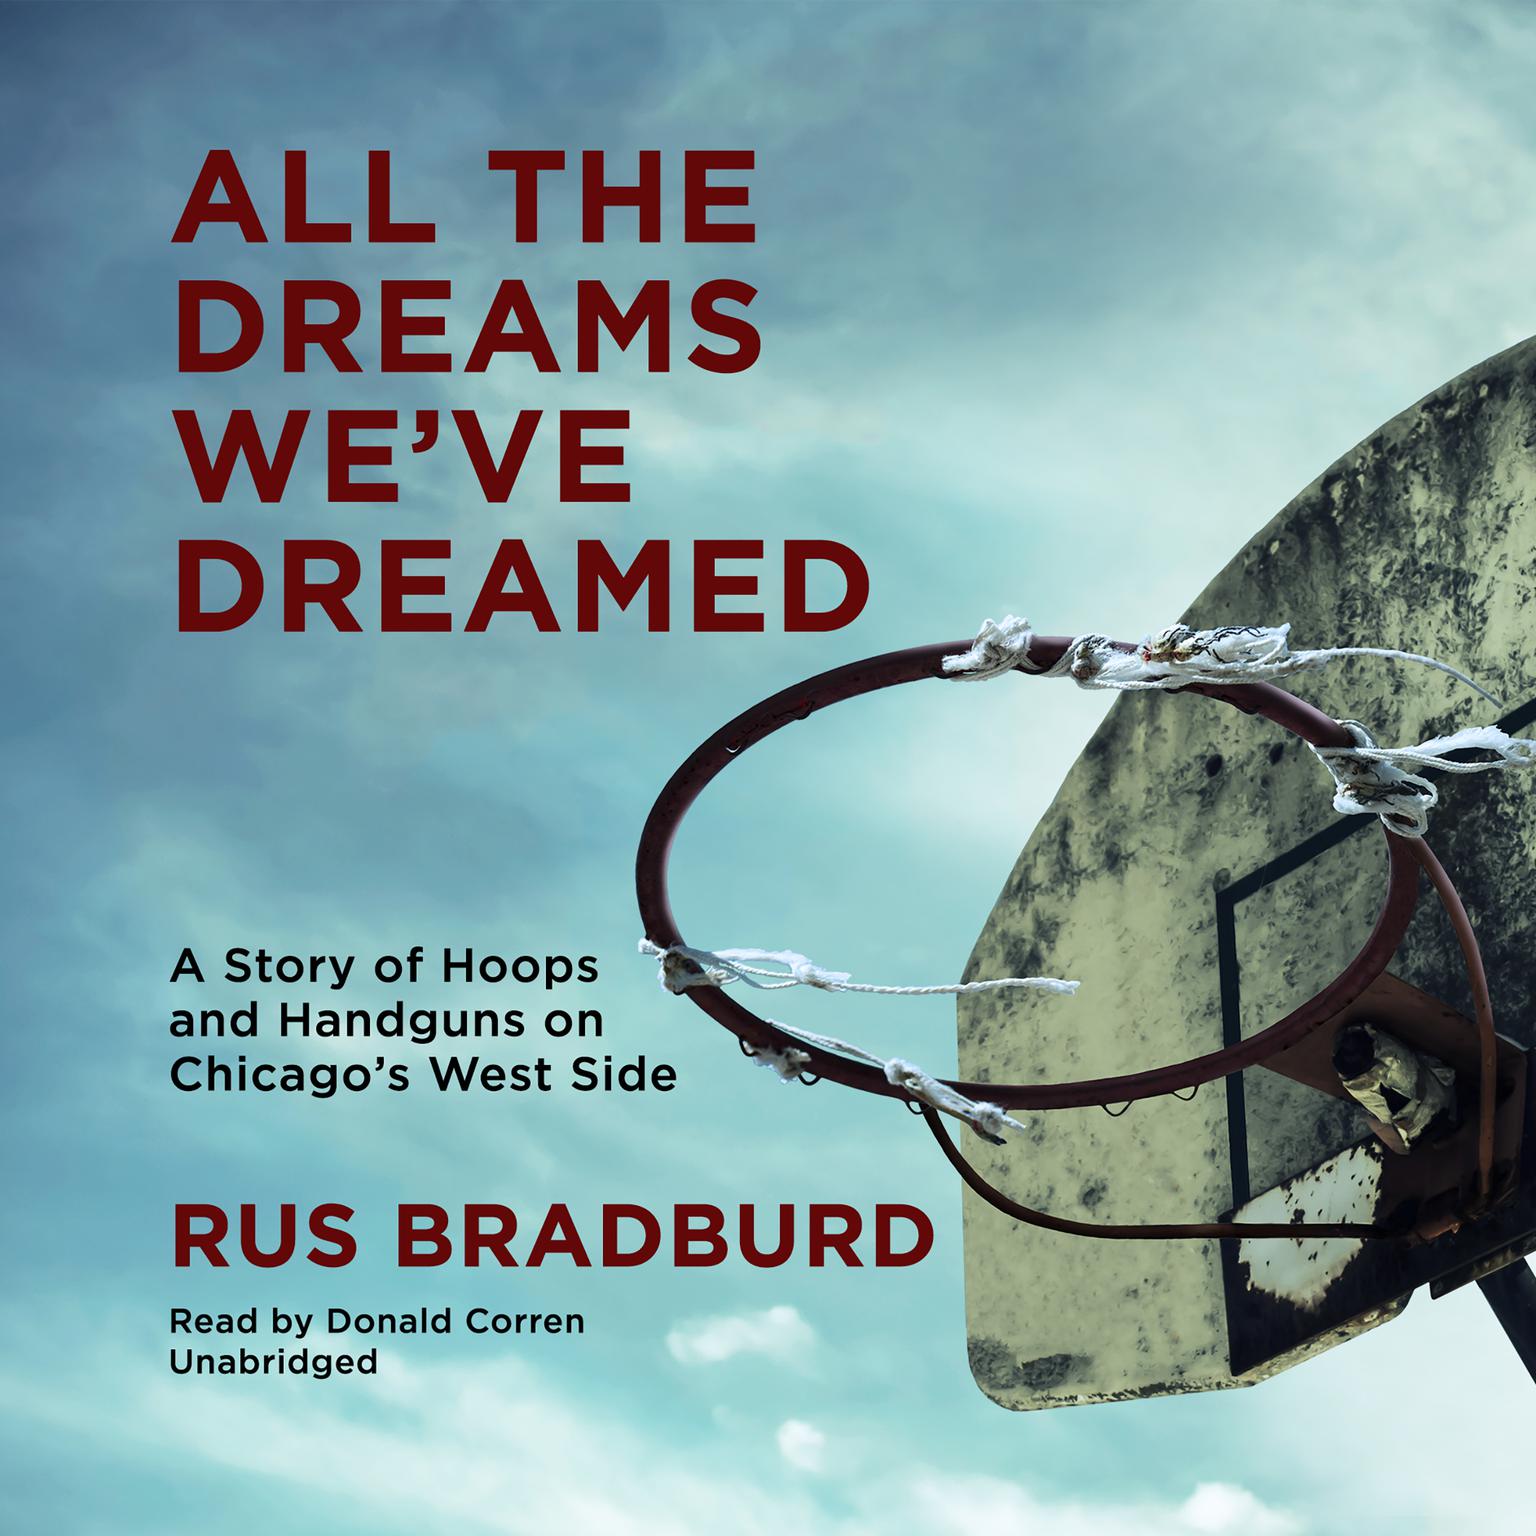 All the Dreams We’ve Dreamed: A Story of Hoops and Handguns on Chicago’s West Side Audiobook, by Rus Bradburd